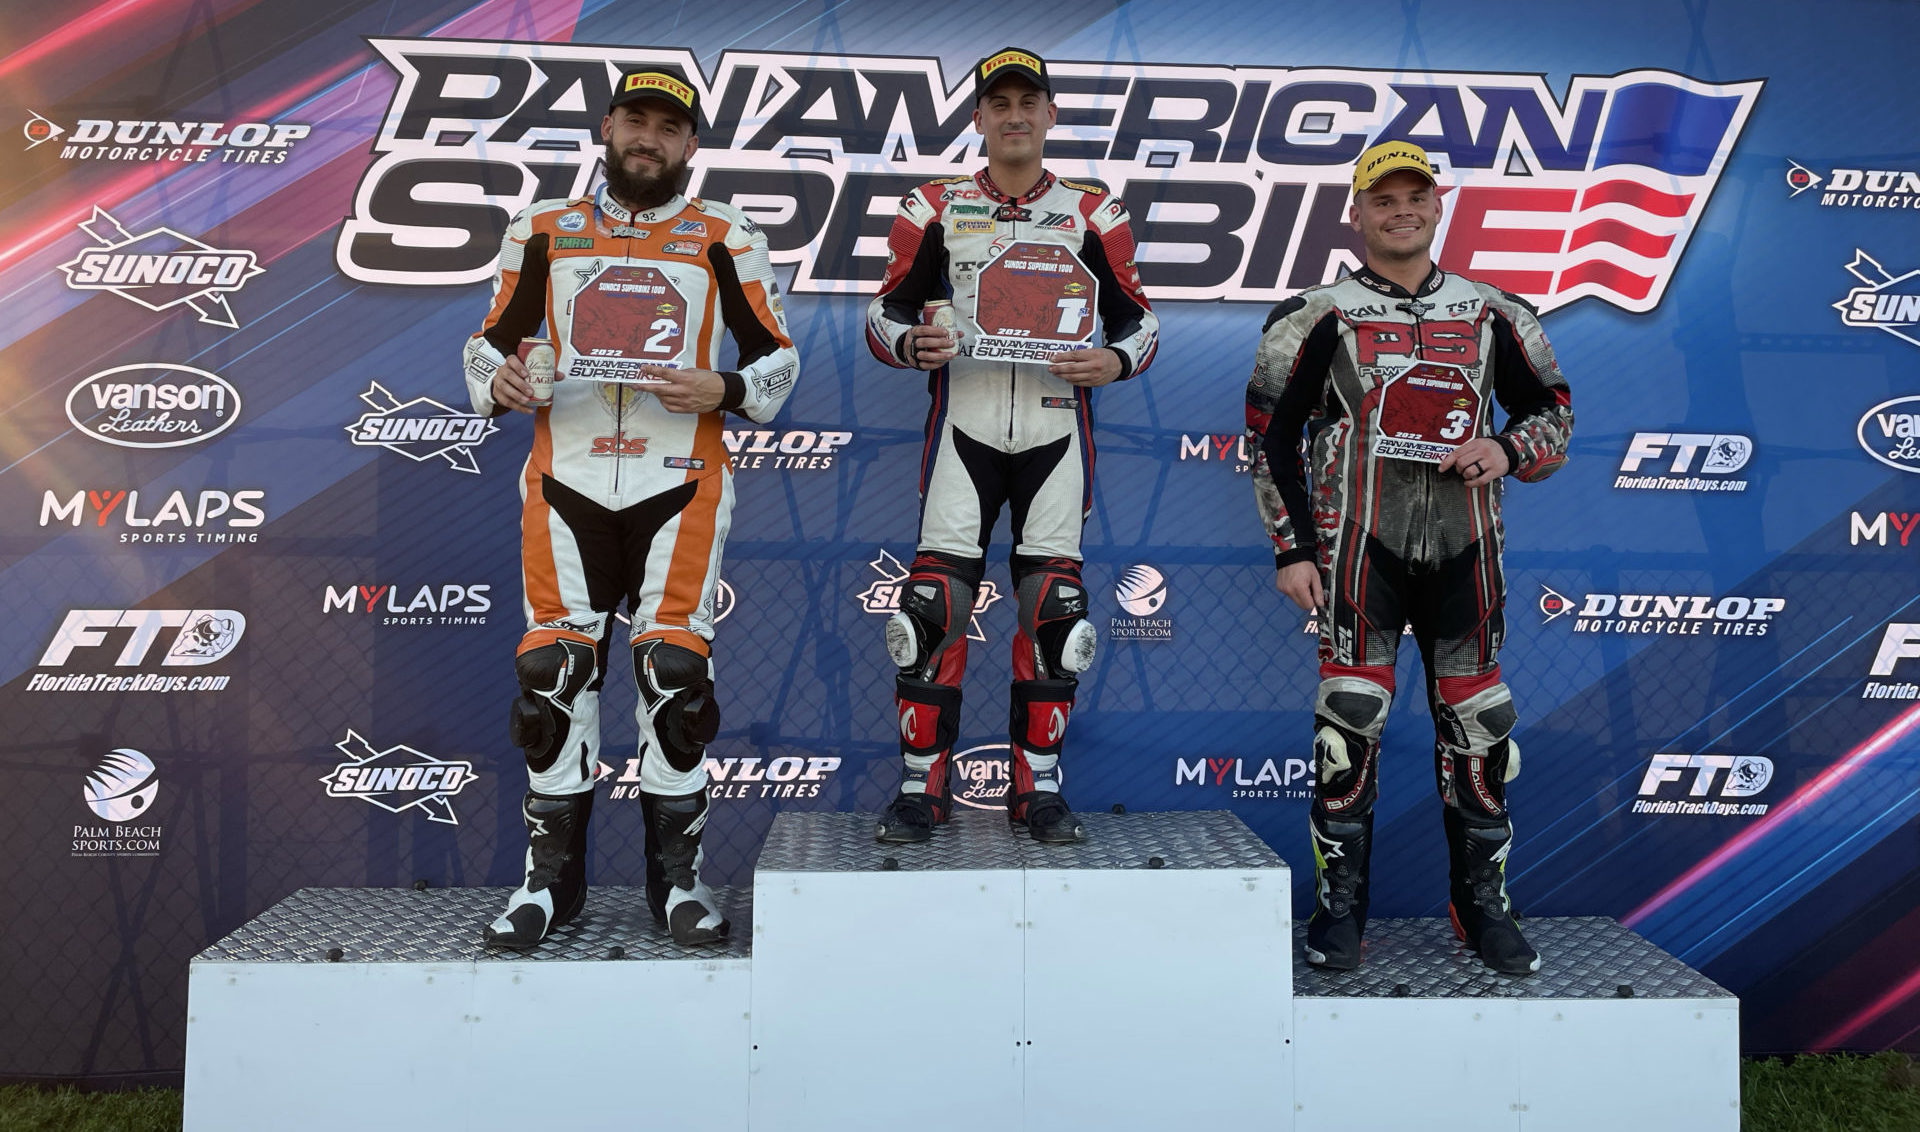 PanAmerican Superbike Sunoco Superbike 1000 race winner Alex Arango (center), runner-up Alex Nieves Jr. (left), and third-place finisher Todd Wagner (right). Photo courtesy PanAmerican Superbike.